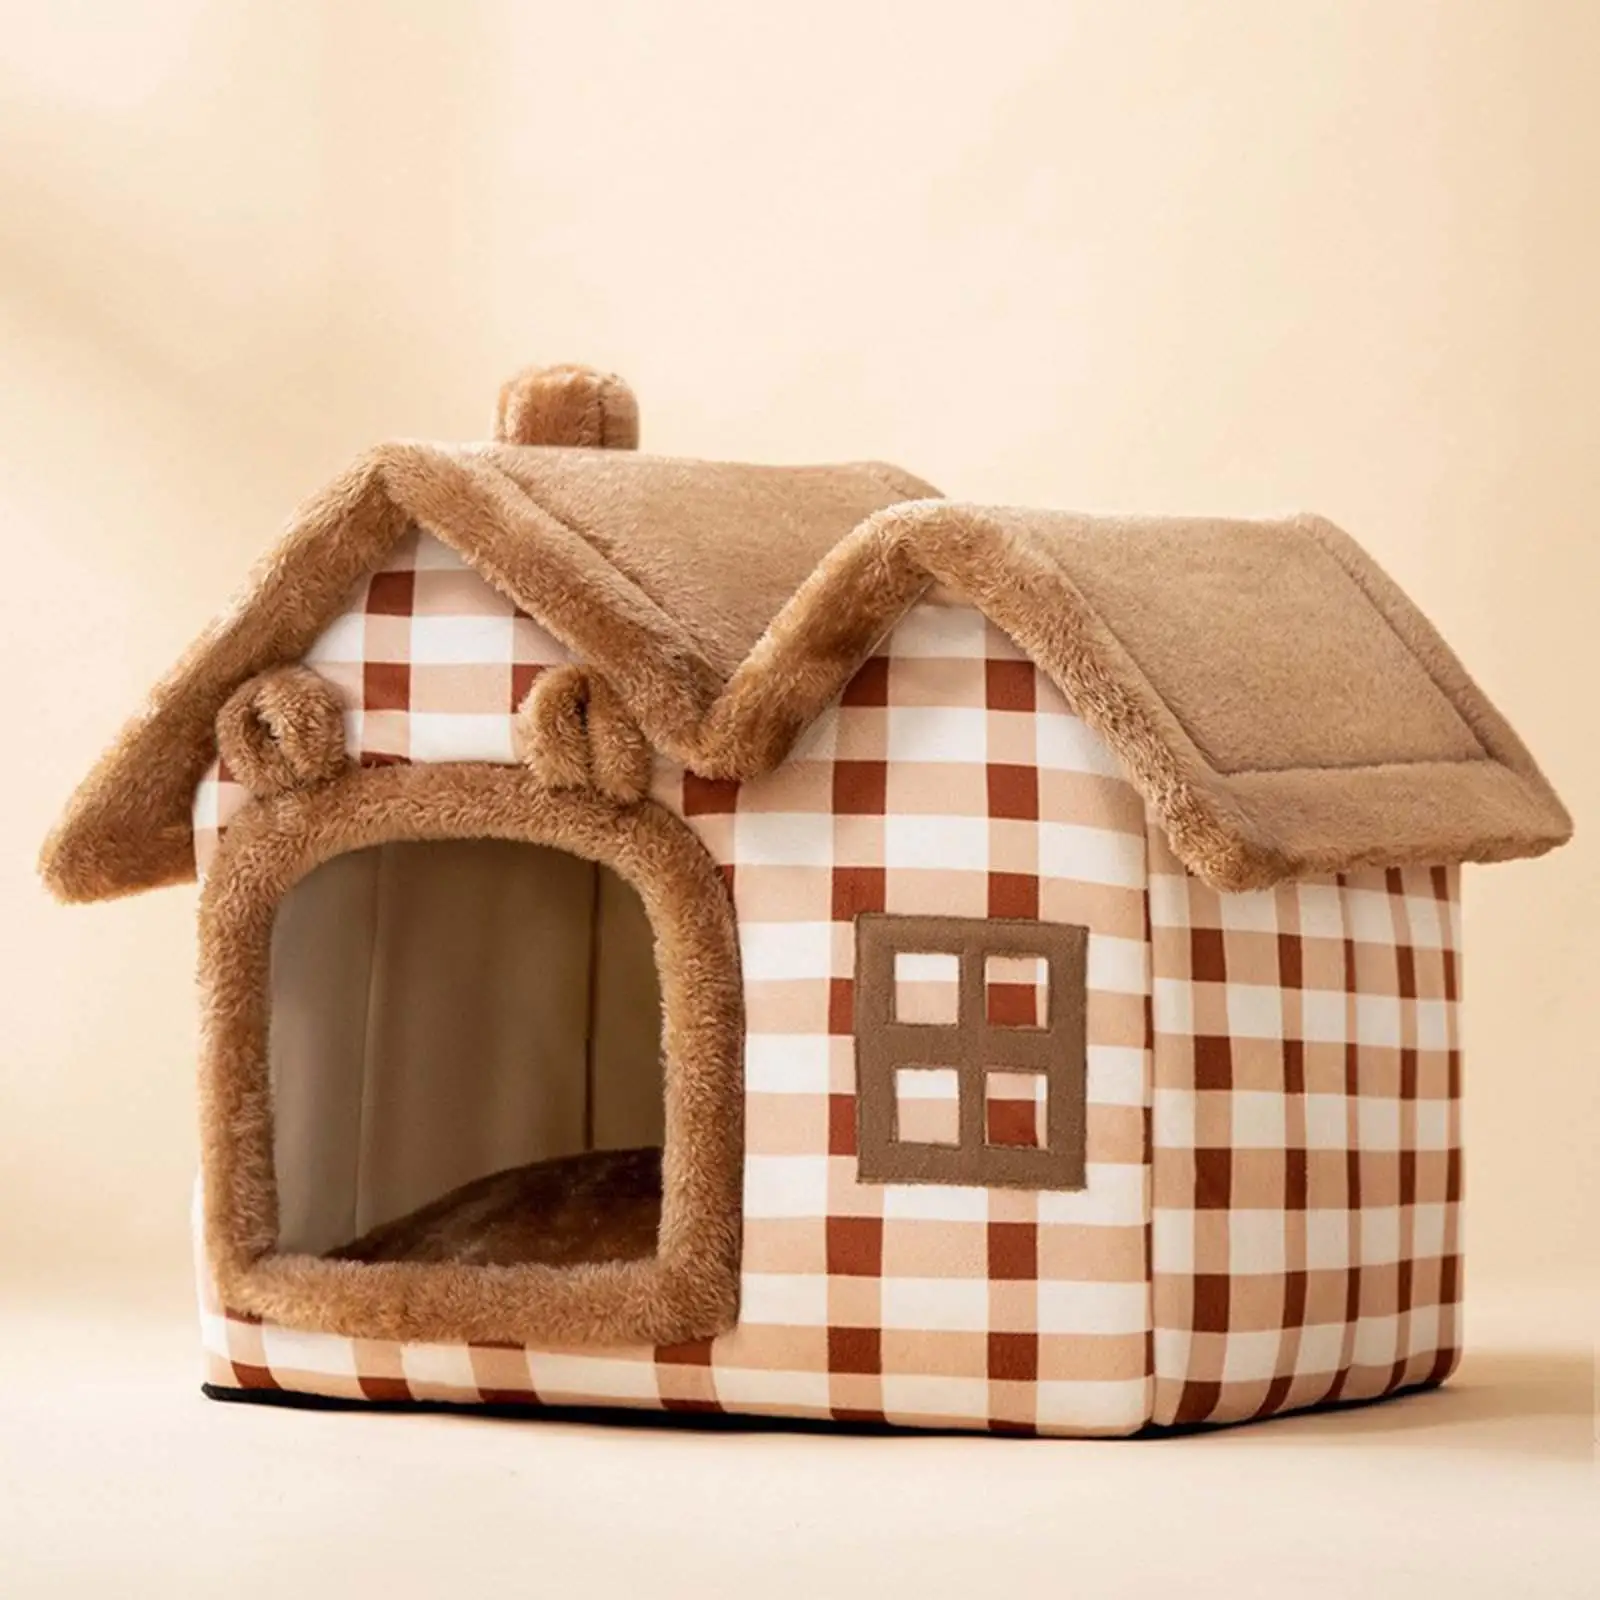 Comfortable Indoor Dog House with Removable Pad Cats Bed Decorative Home Shelter Folding Anti Slip Kitty Cave for Small Animals